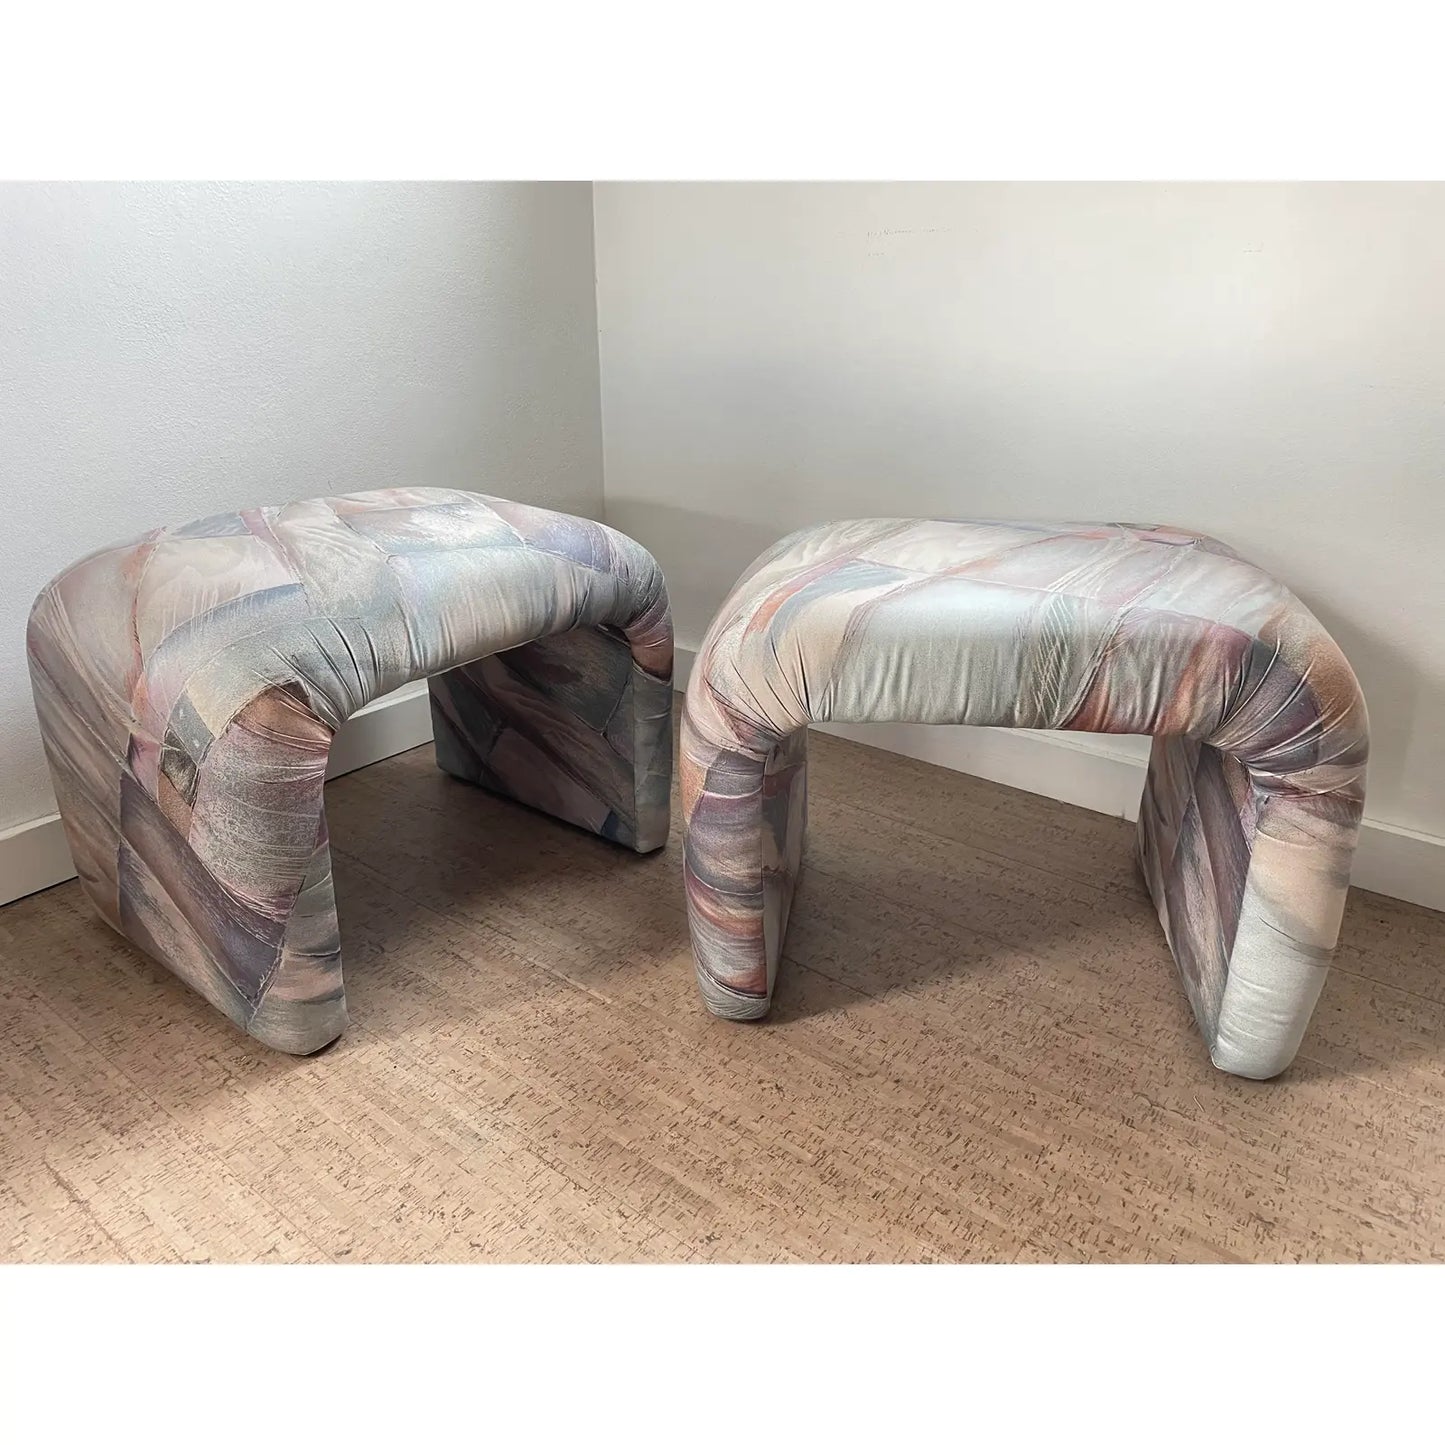 1980s Hollywood Regency Style Waterfall Stools - a Pair